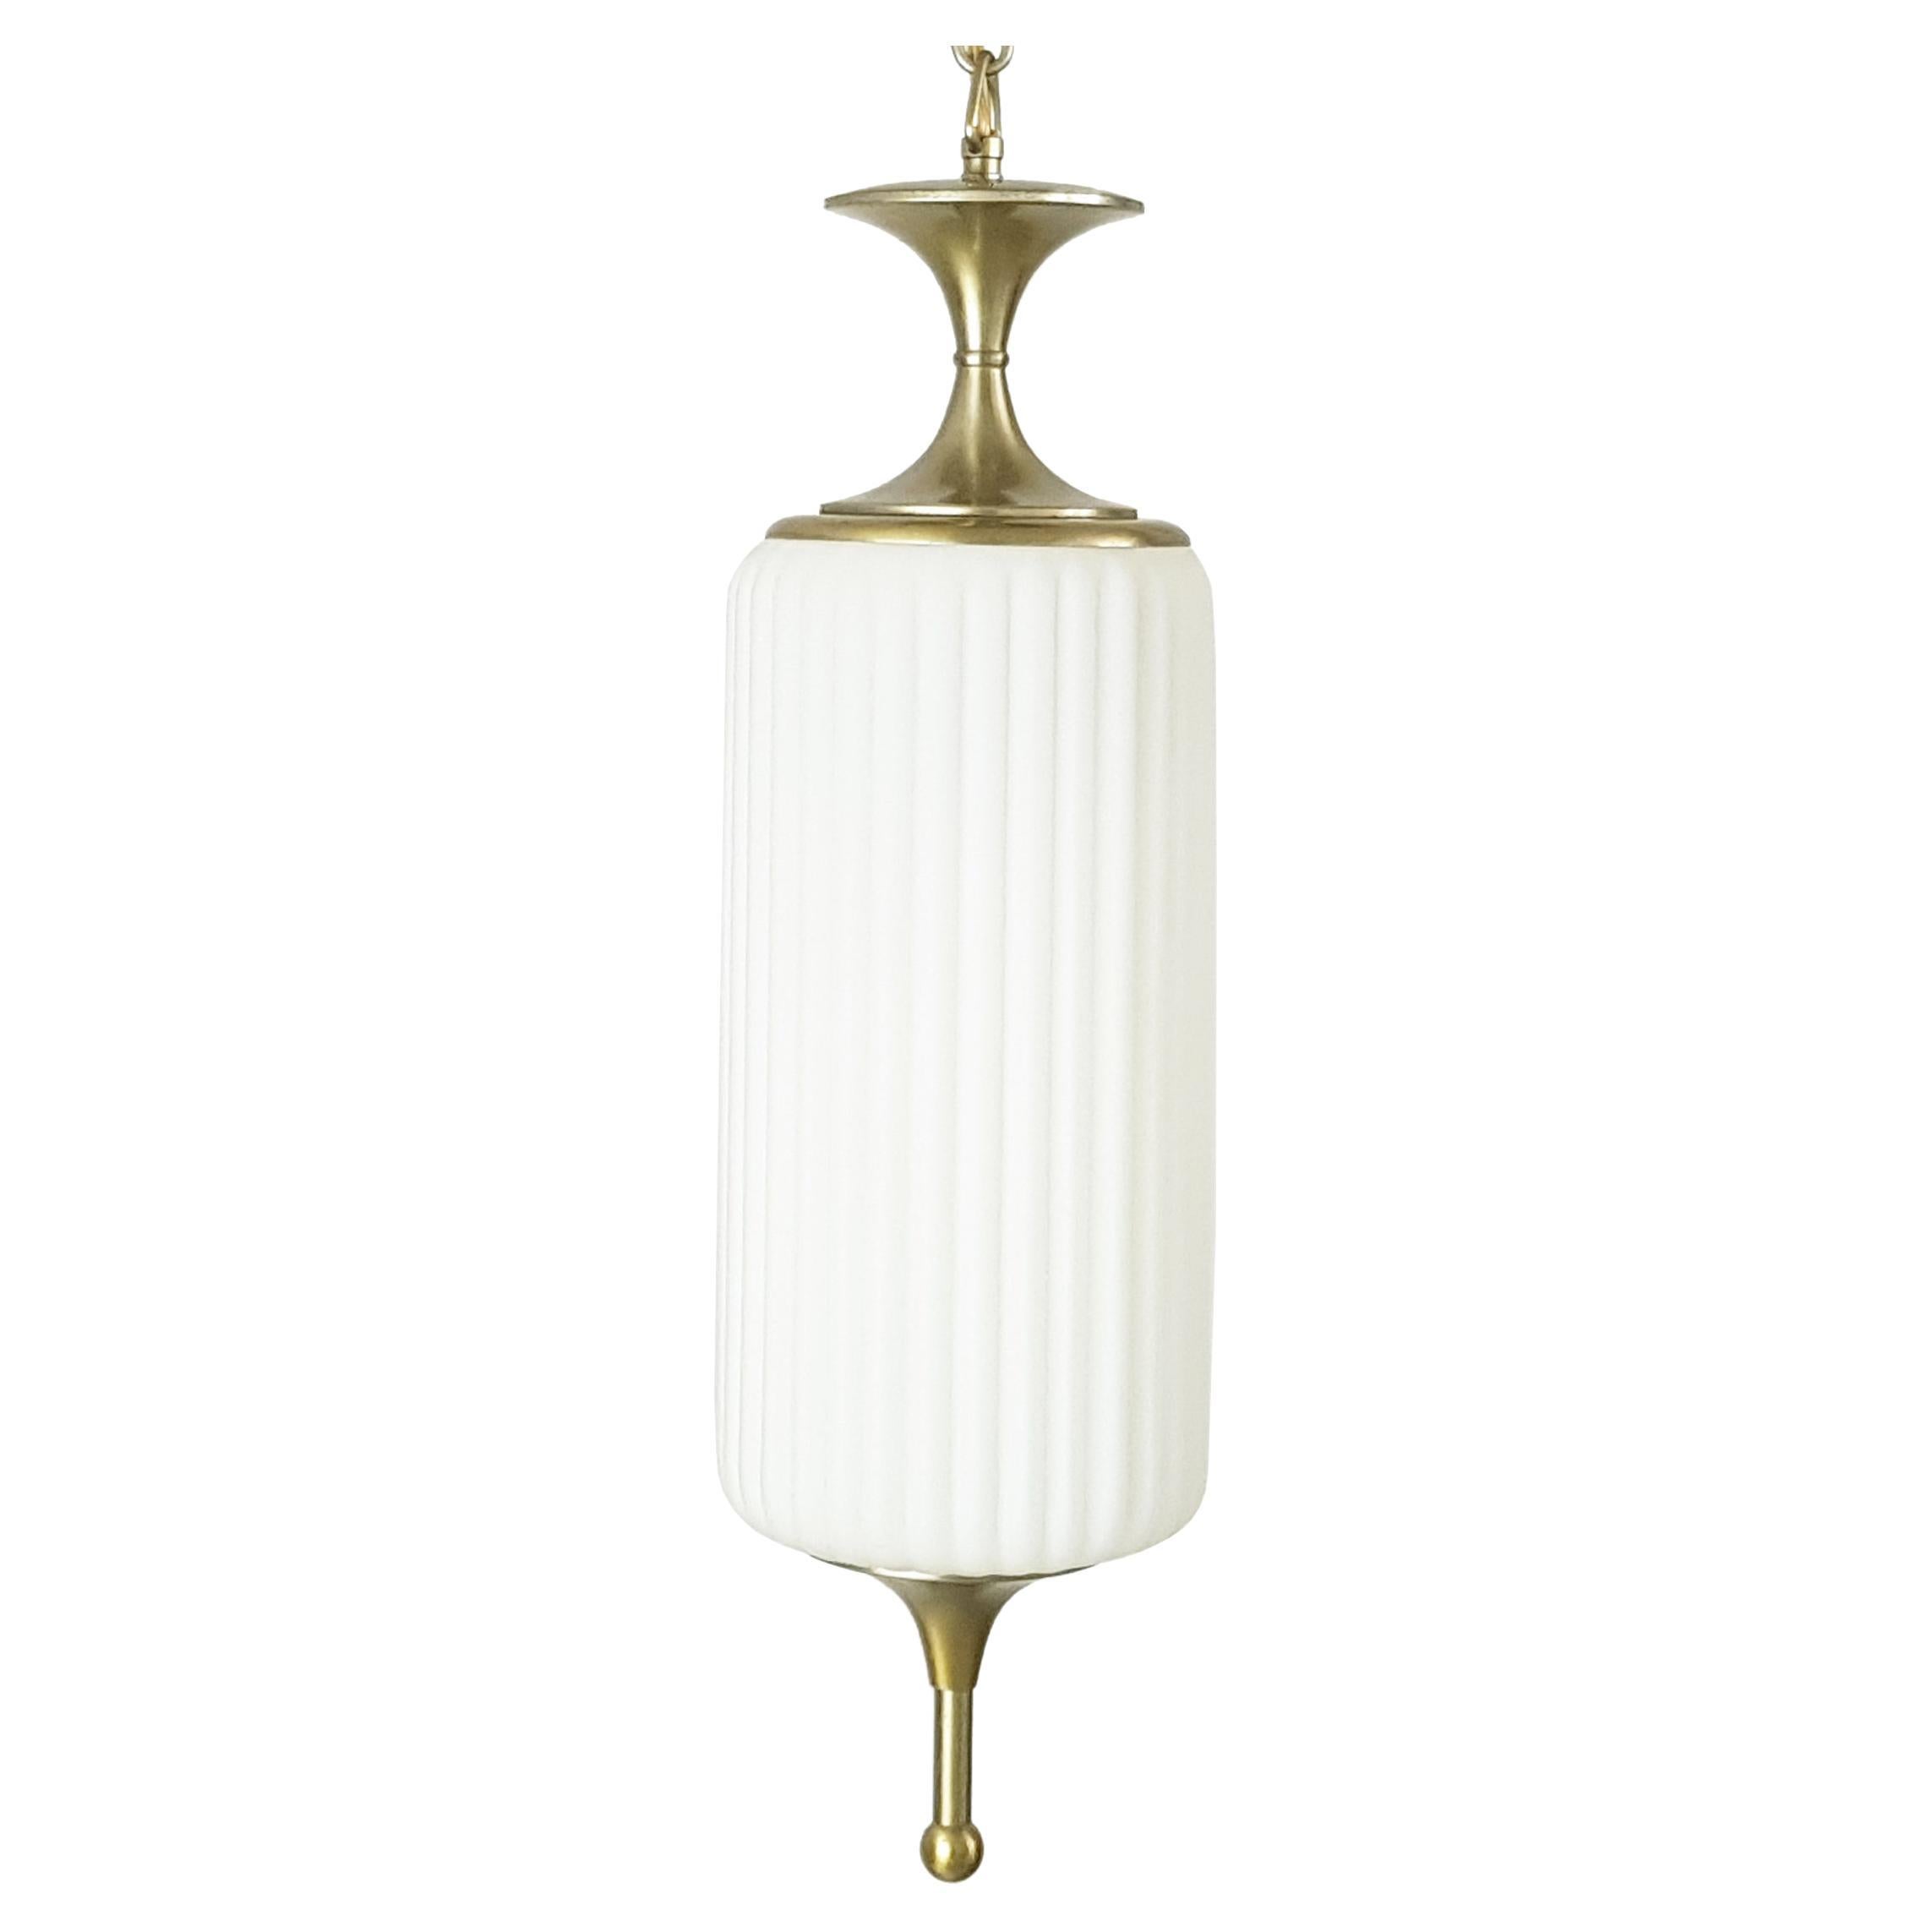 Opaline Glass & Nickel Plated Metal 1960s Pendant Lamp by Reggiani, Italy For Sale